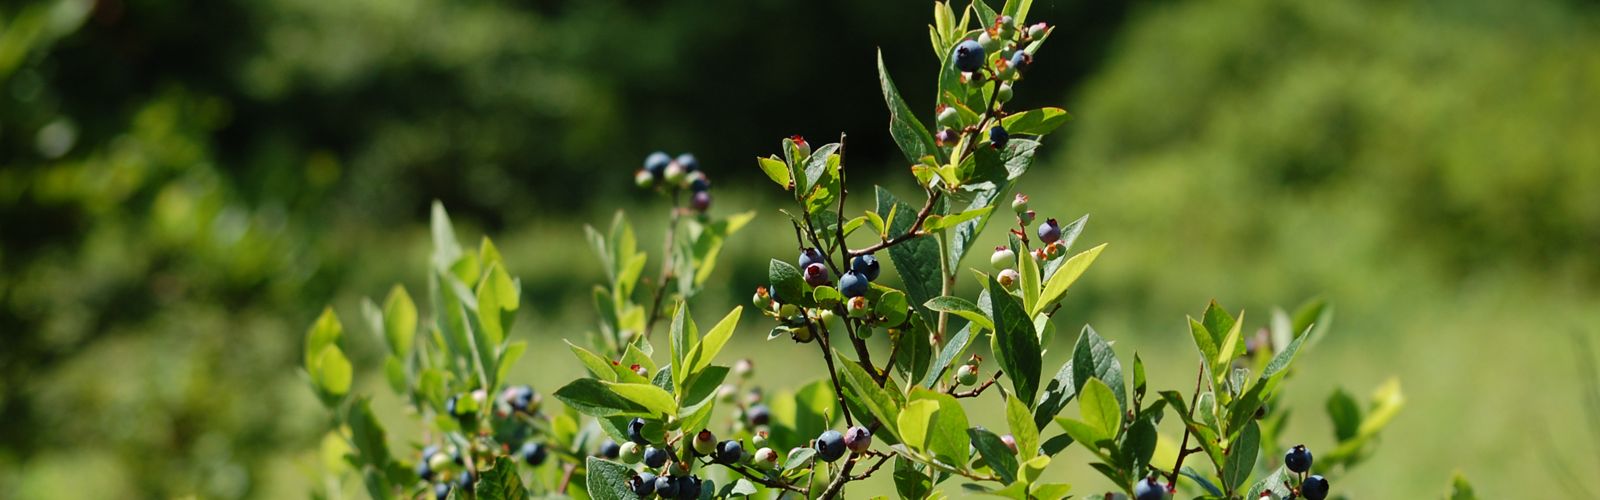 A large blueberry bush with several green leaves and small round blue berries.